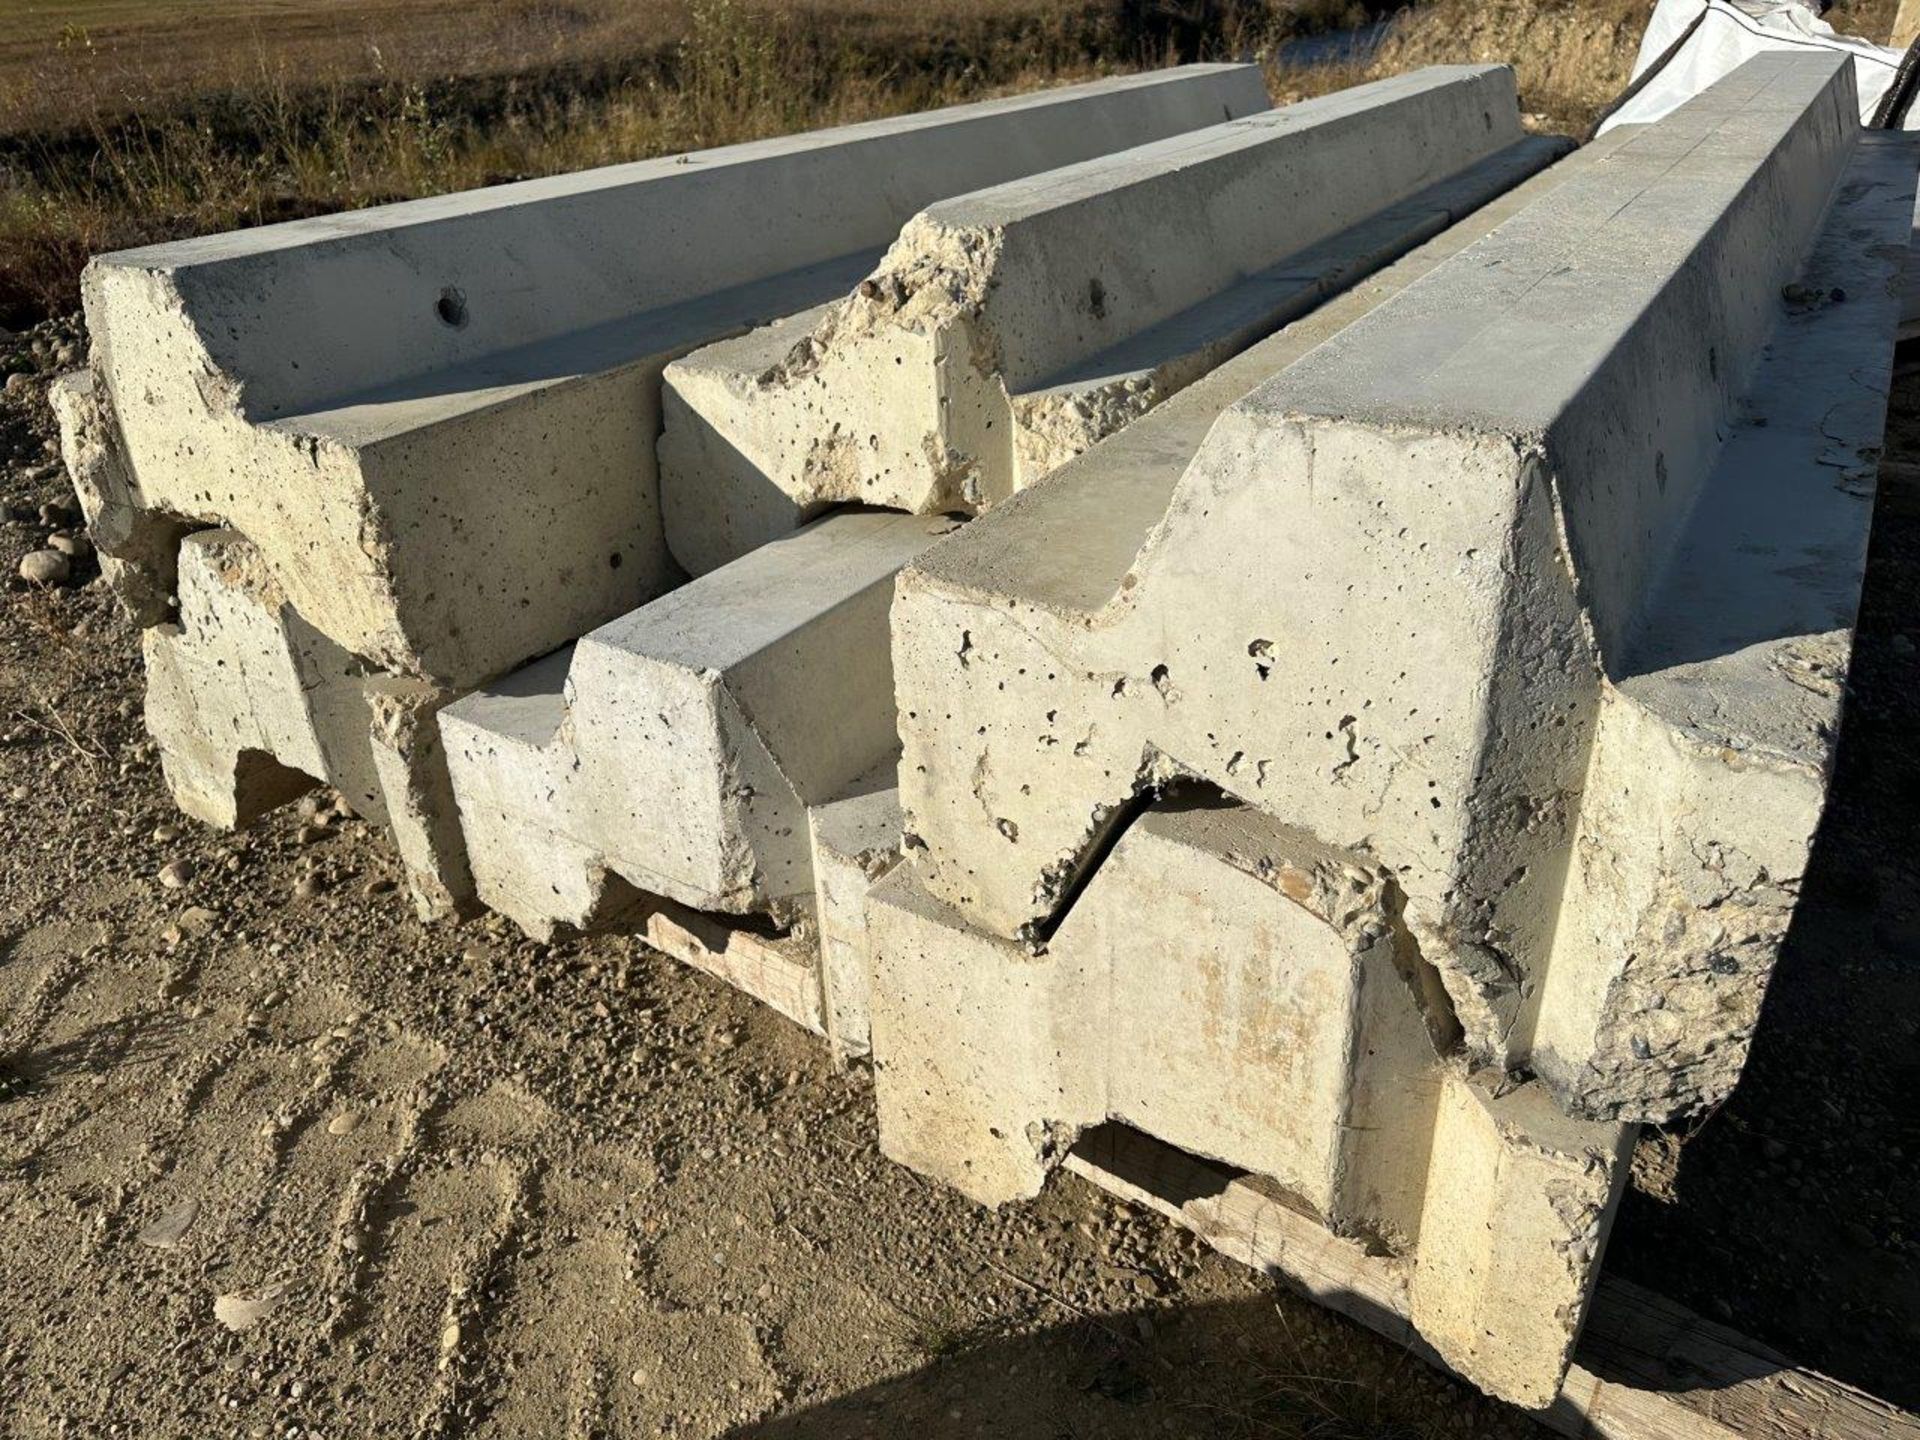 6-STACKABLE PRECAST CONCRETE BARRIERS 10FT X 24" X 18" - This Lot is Located at D&M Concrete West - Image 2 of 3